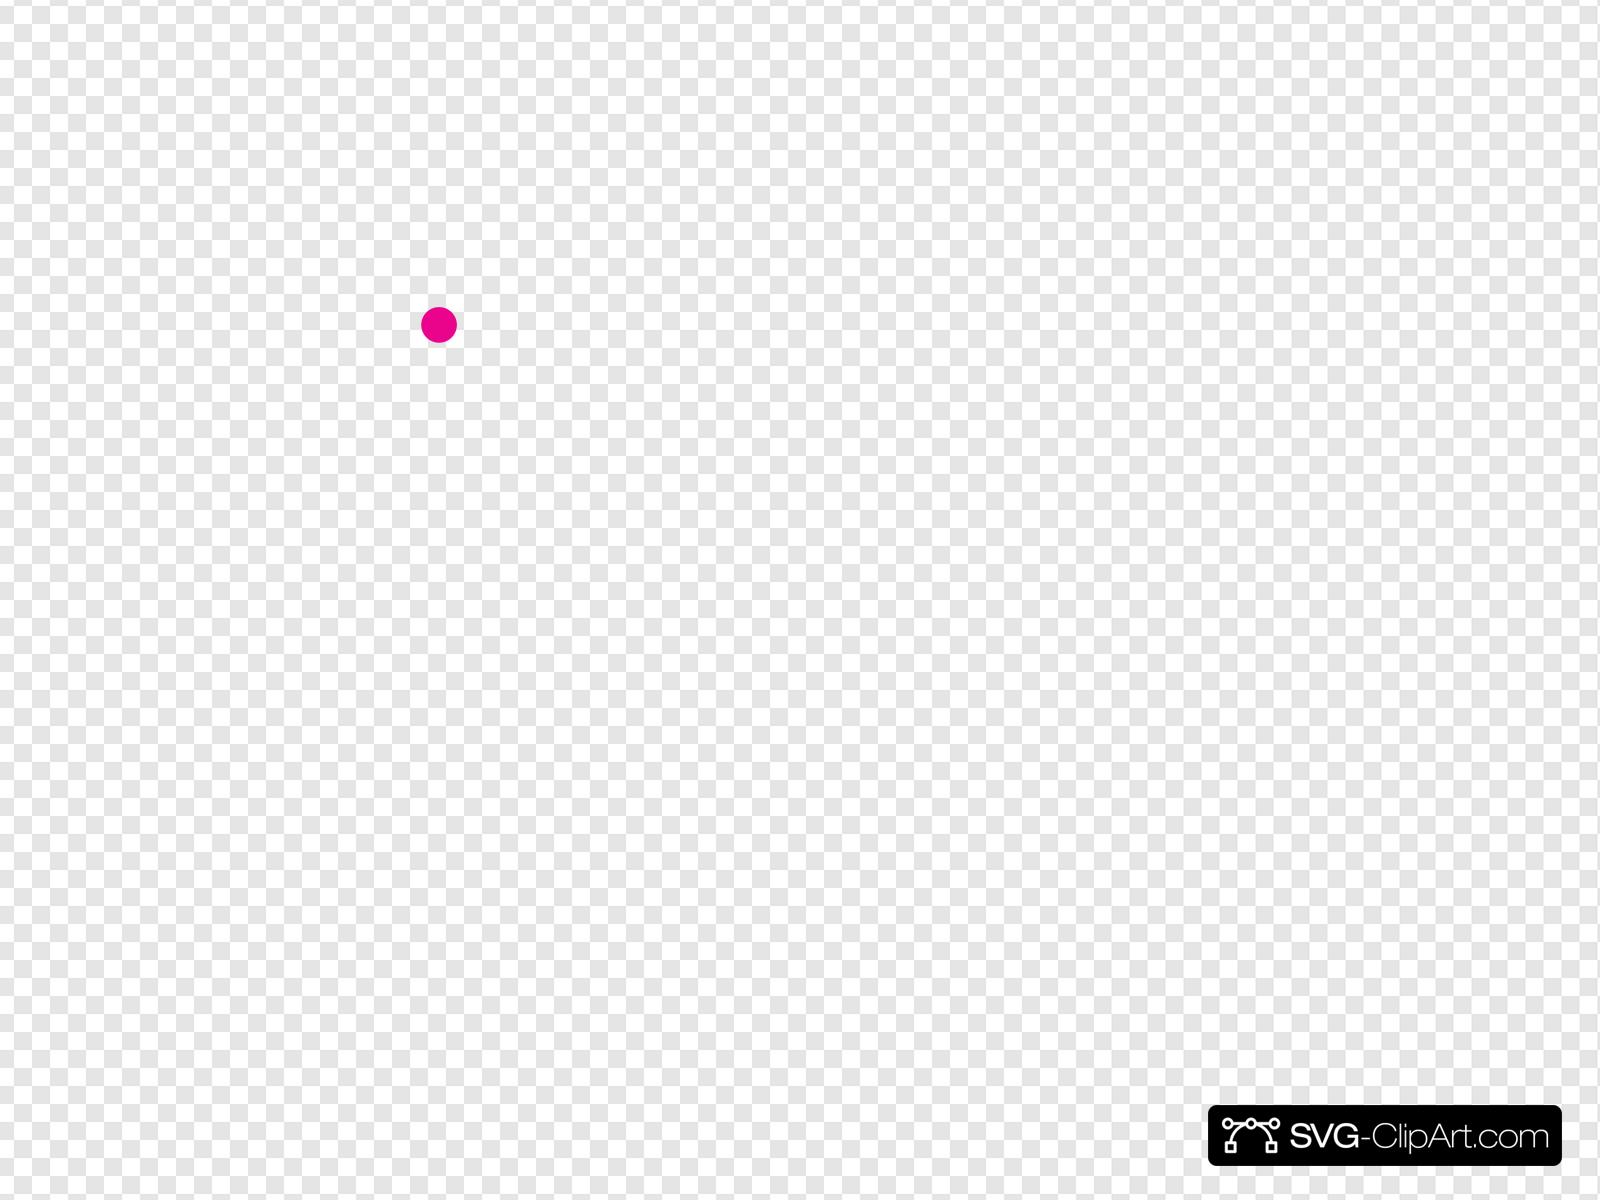 Pink Dot Clip art, Icon and SVG.